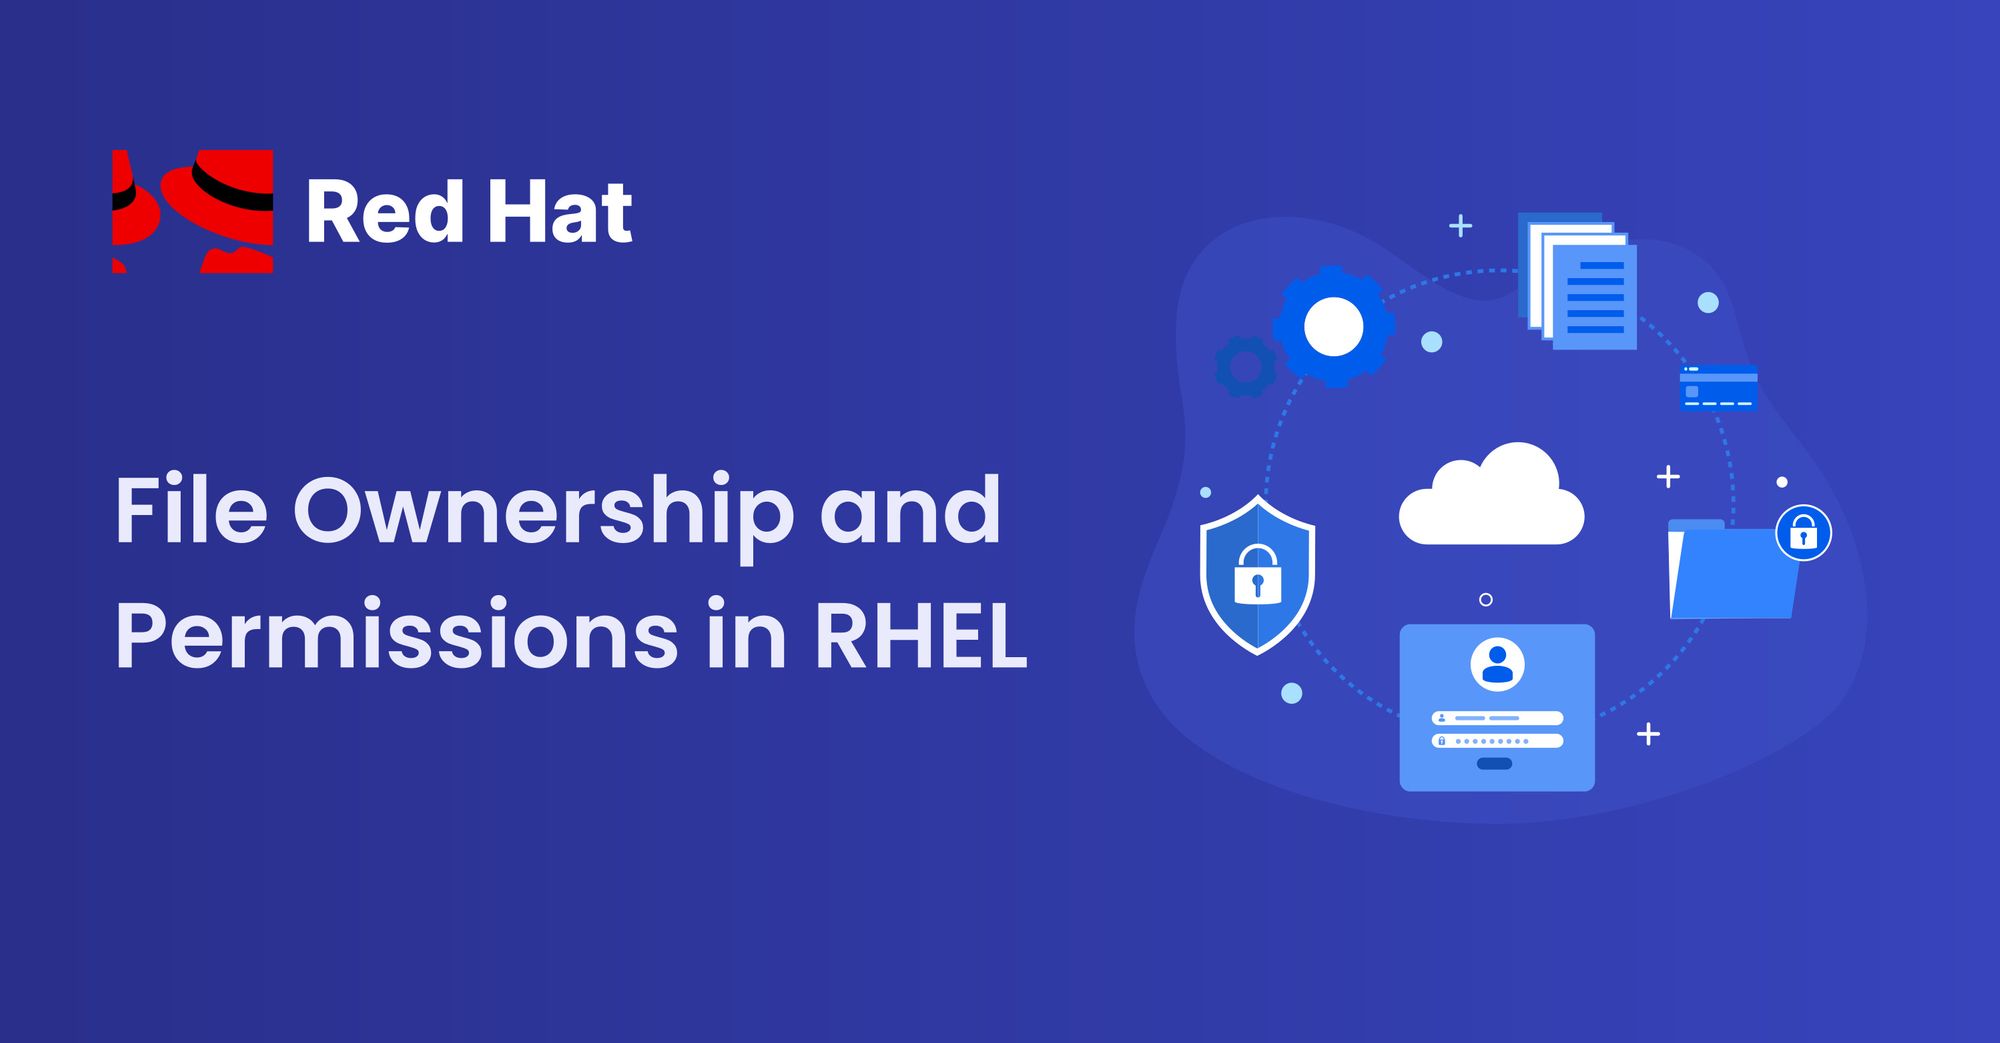 How File Ownership and Permissions Work in RHEL